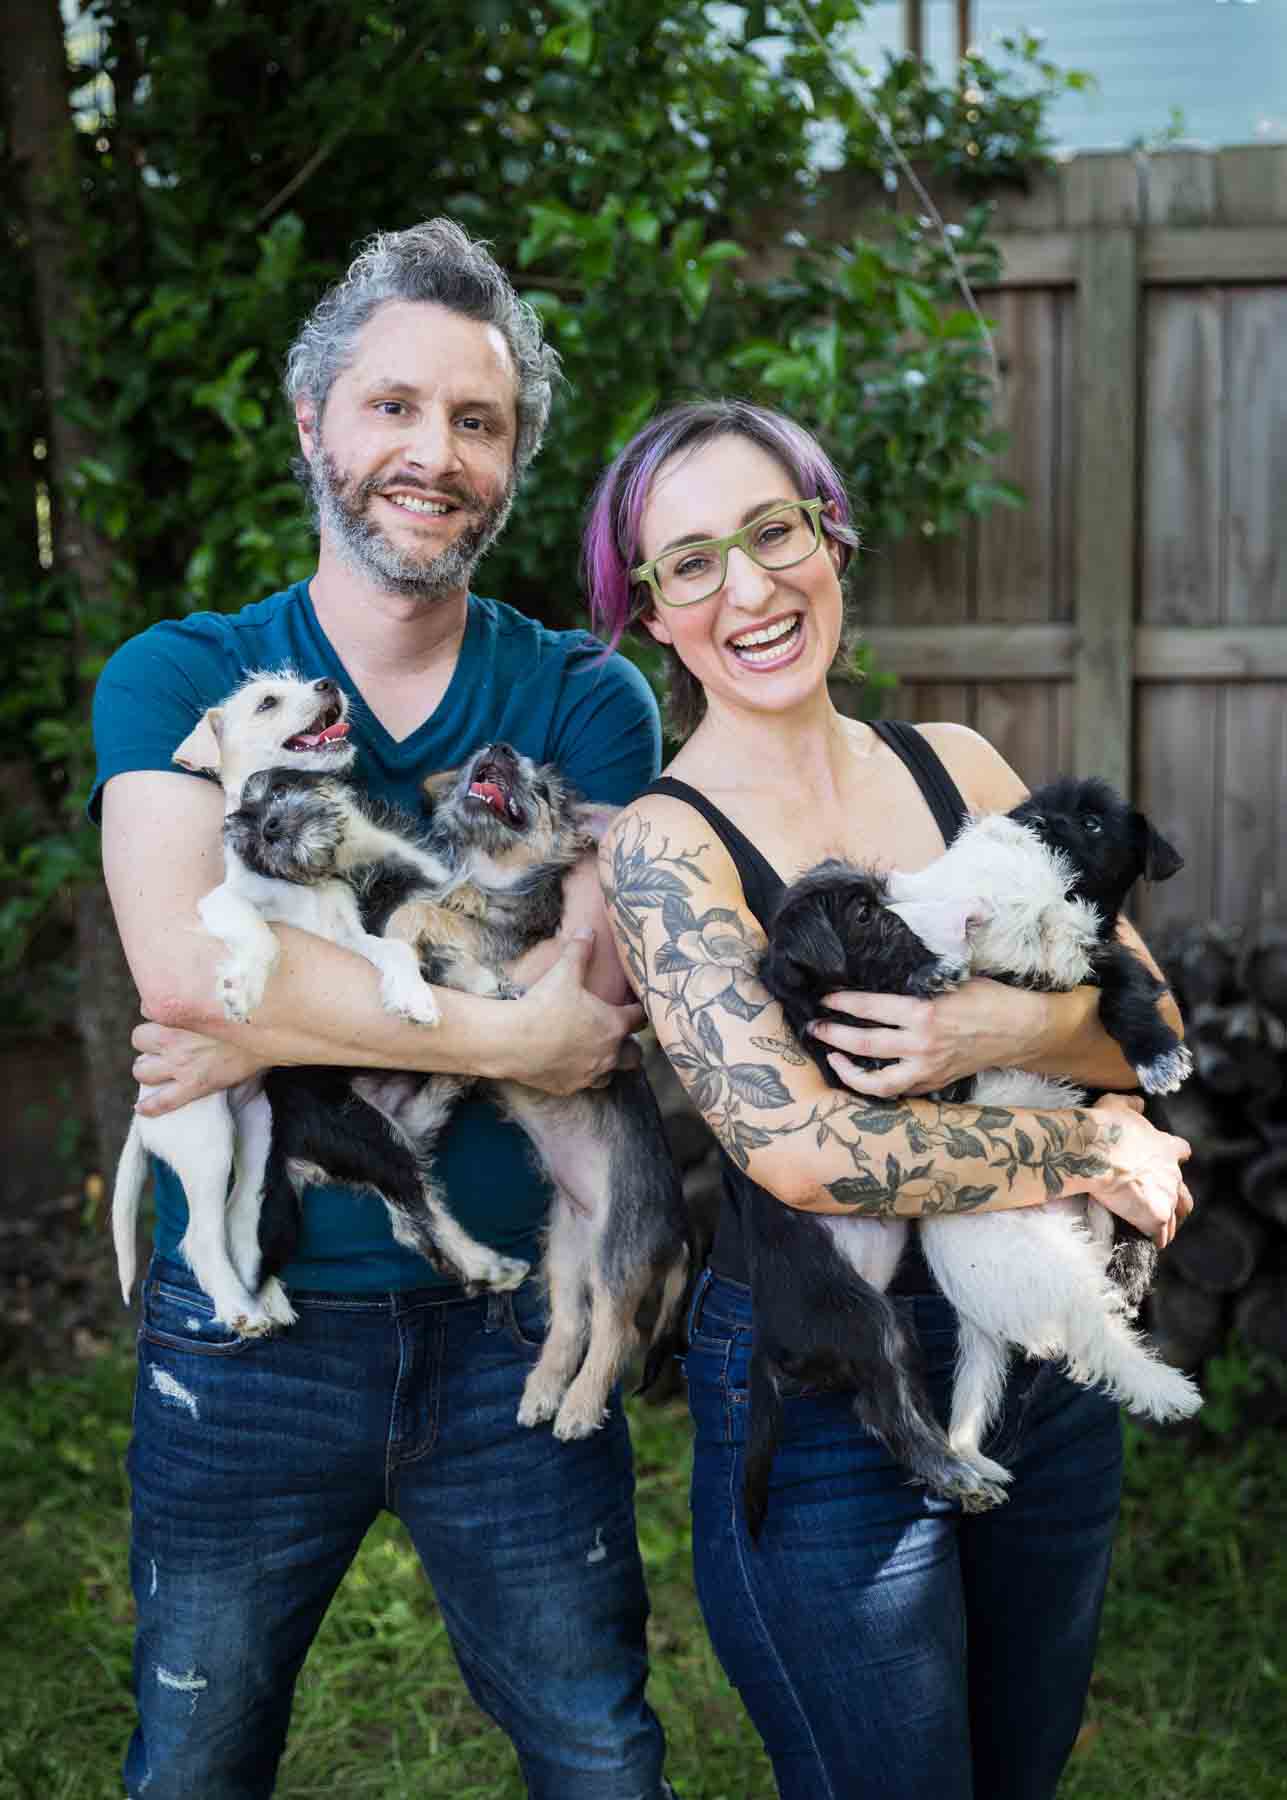 Man and woman holding puppies in their arms in front of wooden fence for an article on pet photo tips